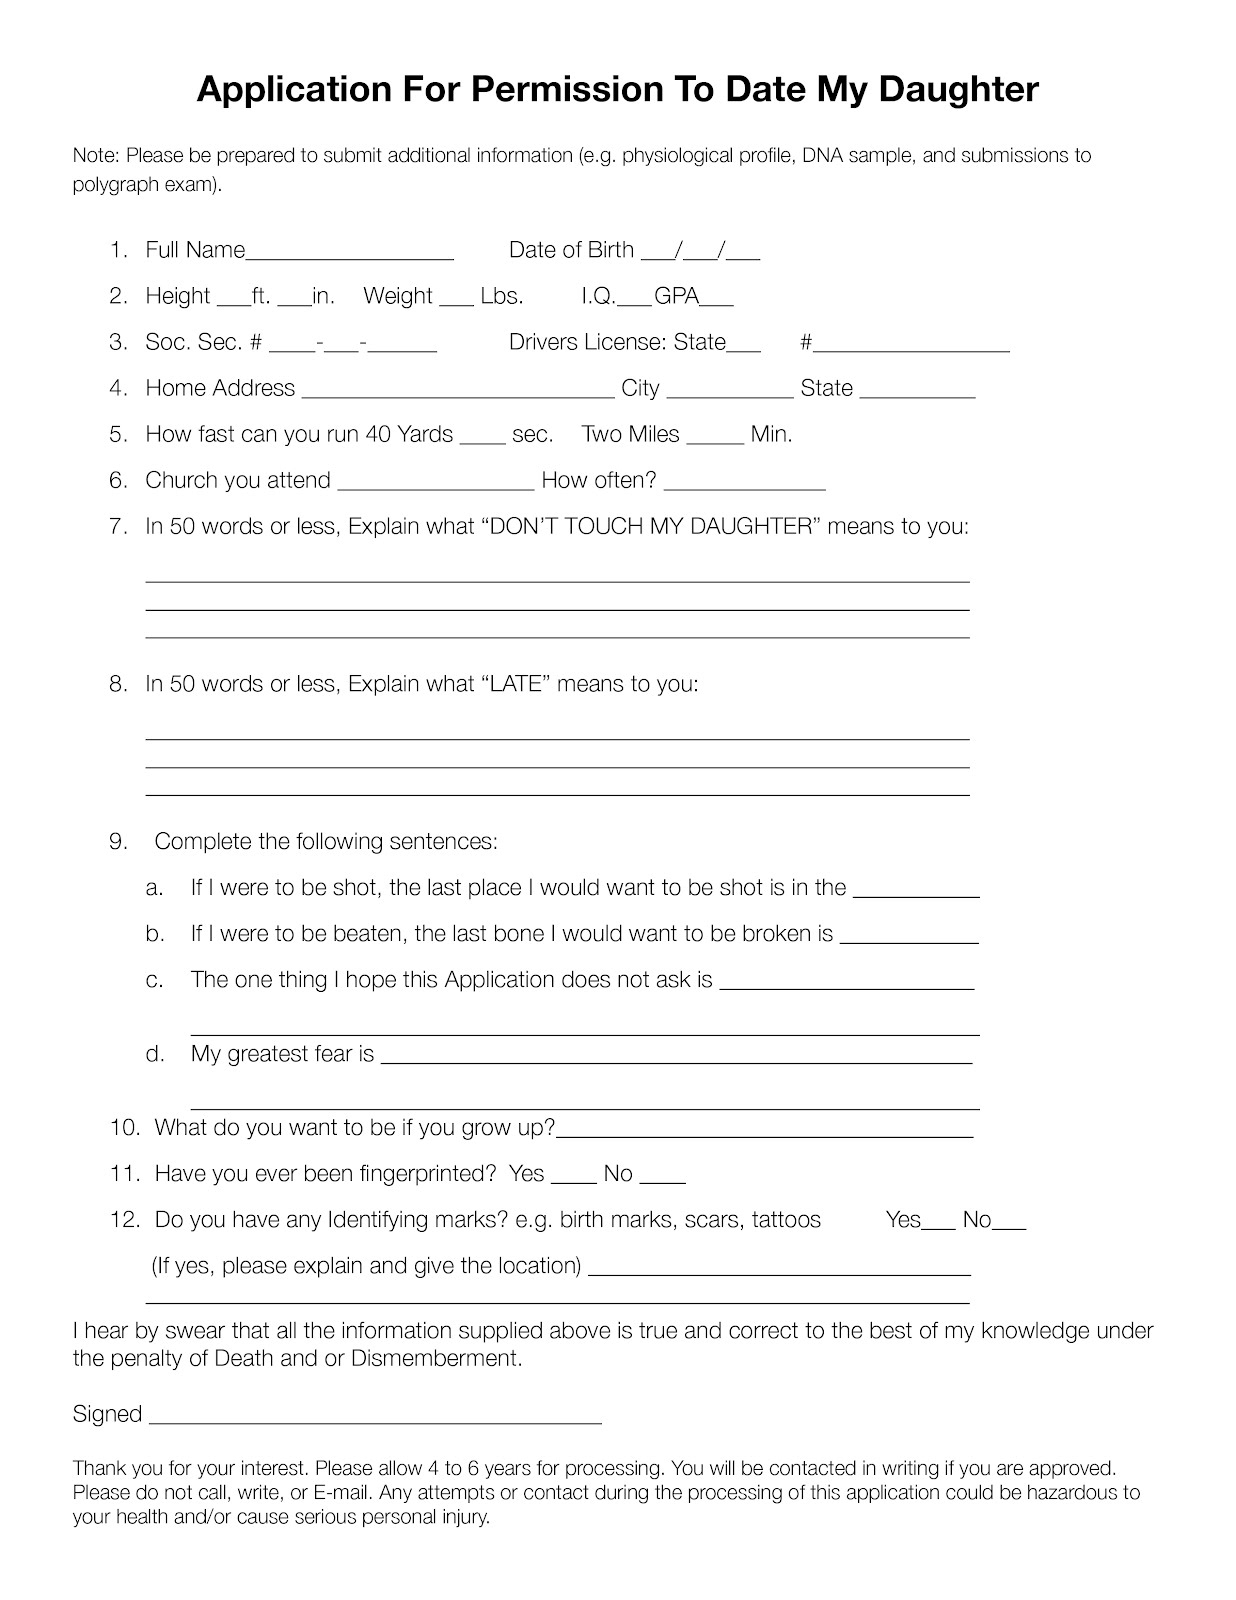 Dating Me Application